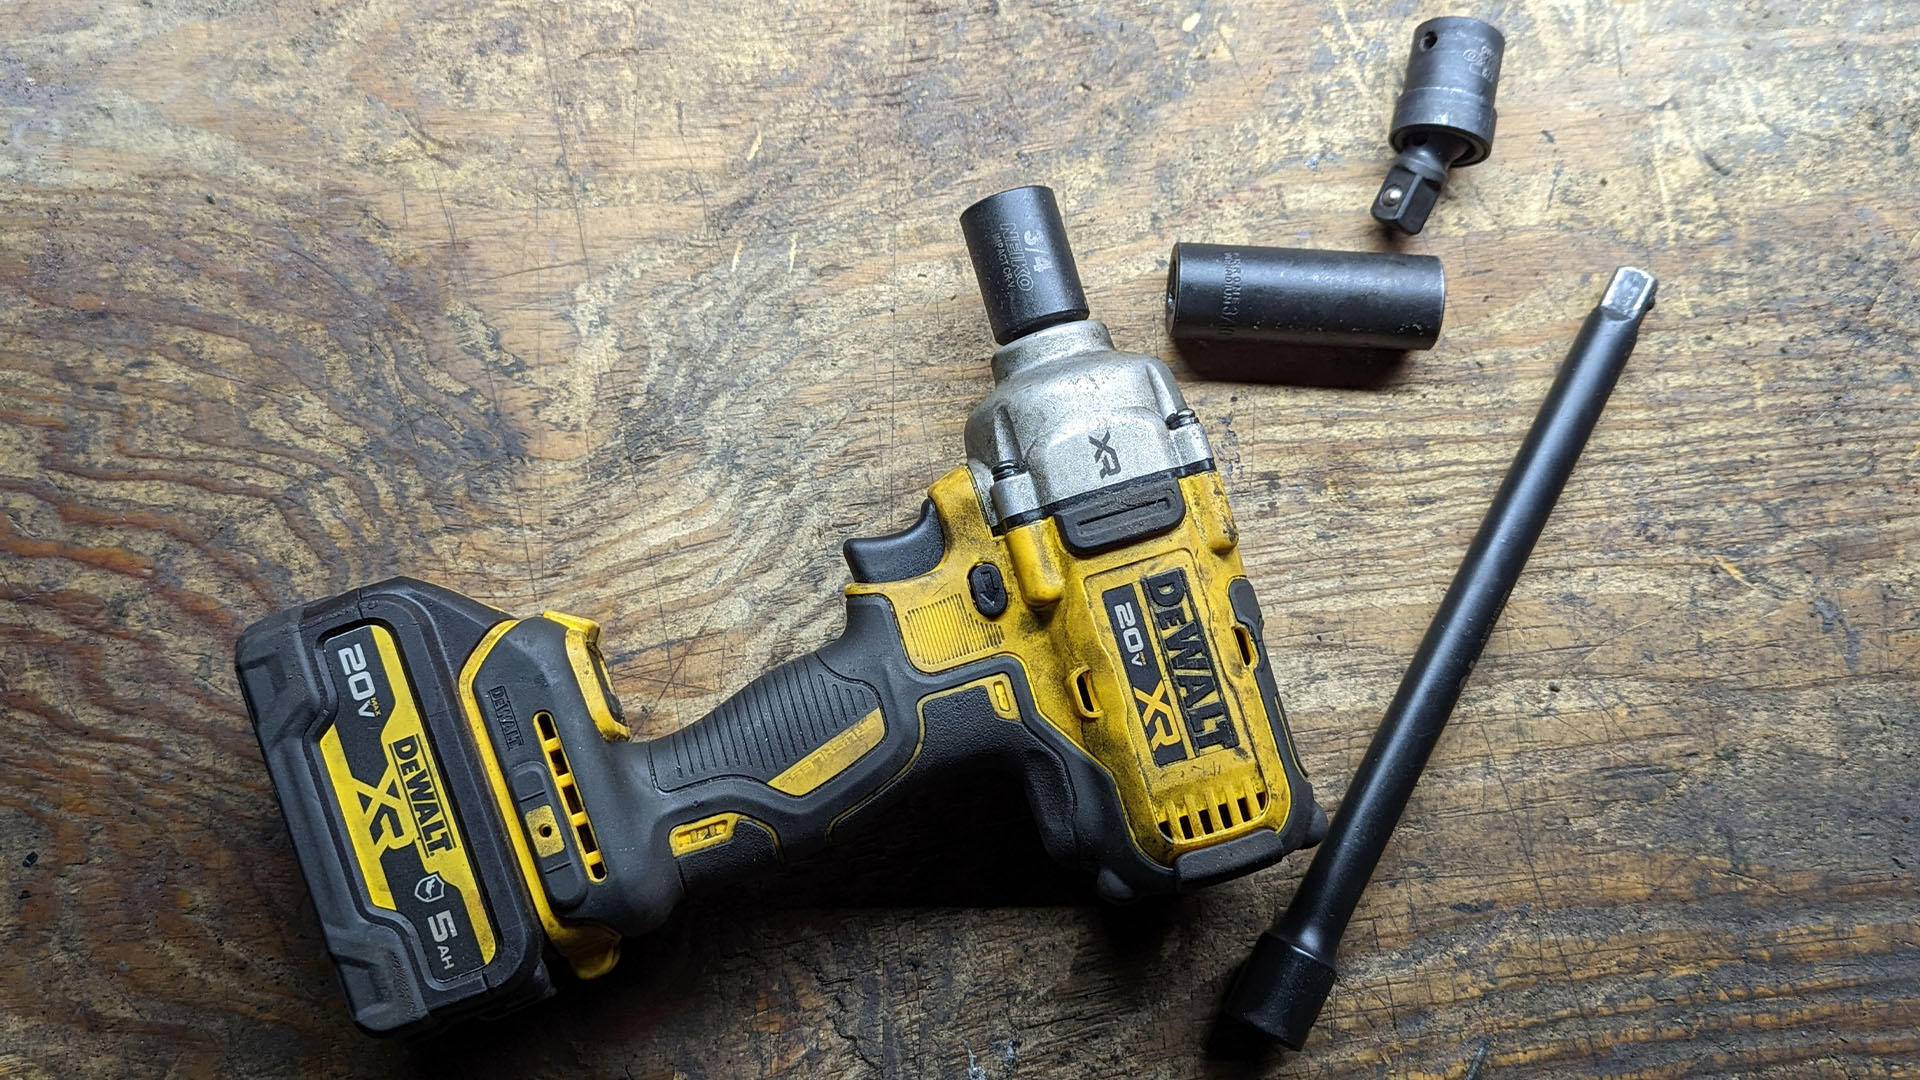 How does an impact wrench work?